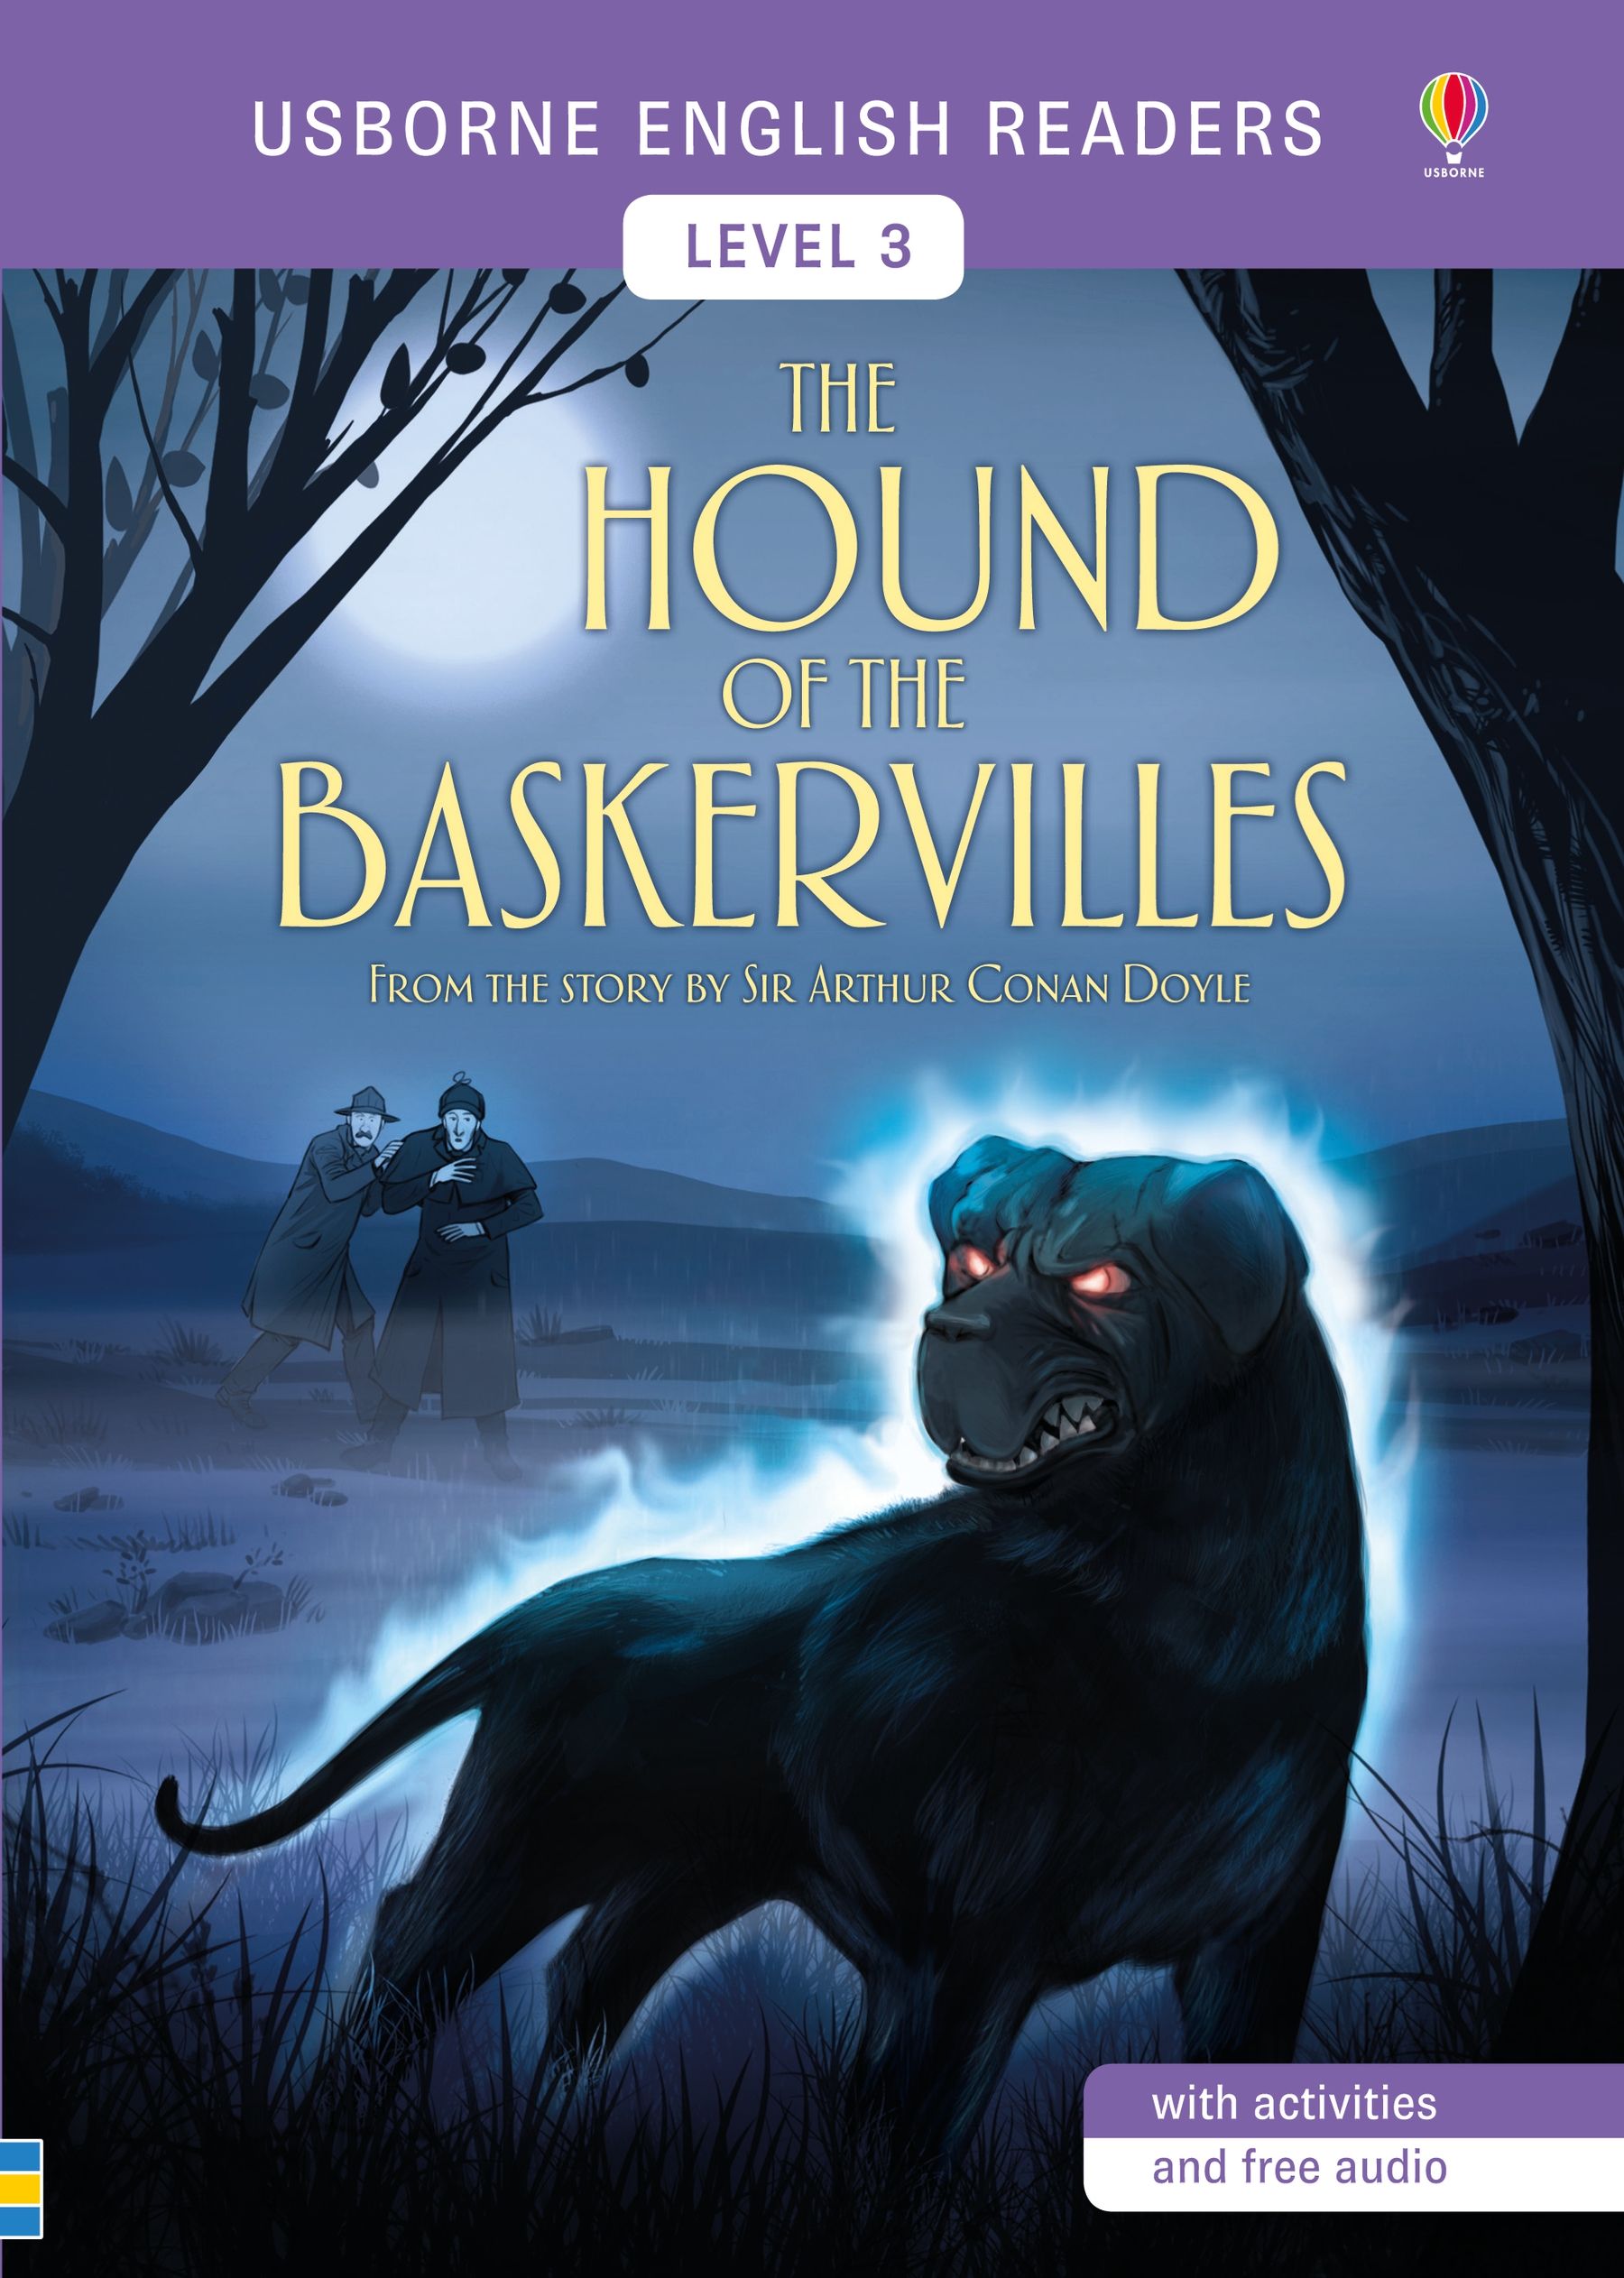 Usborne English Reading: The Hound of the Baskervilles